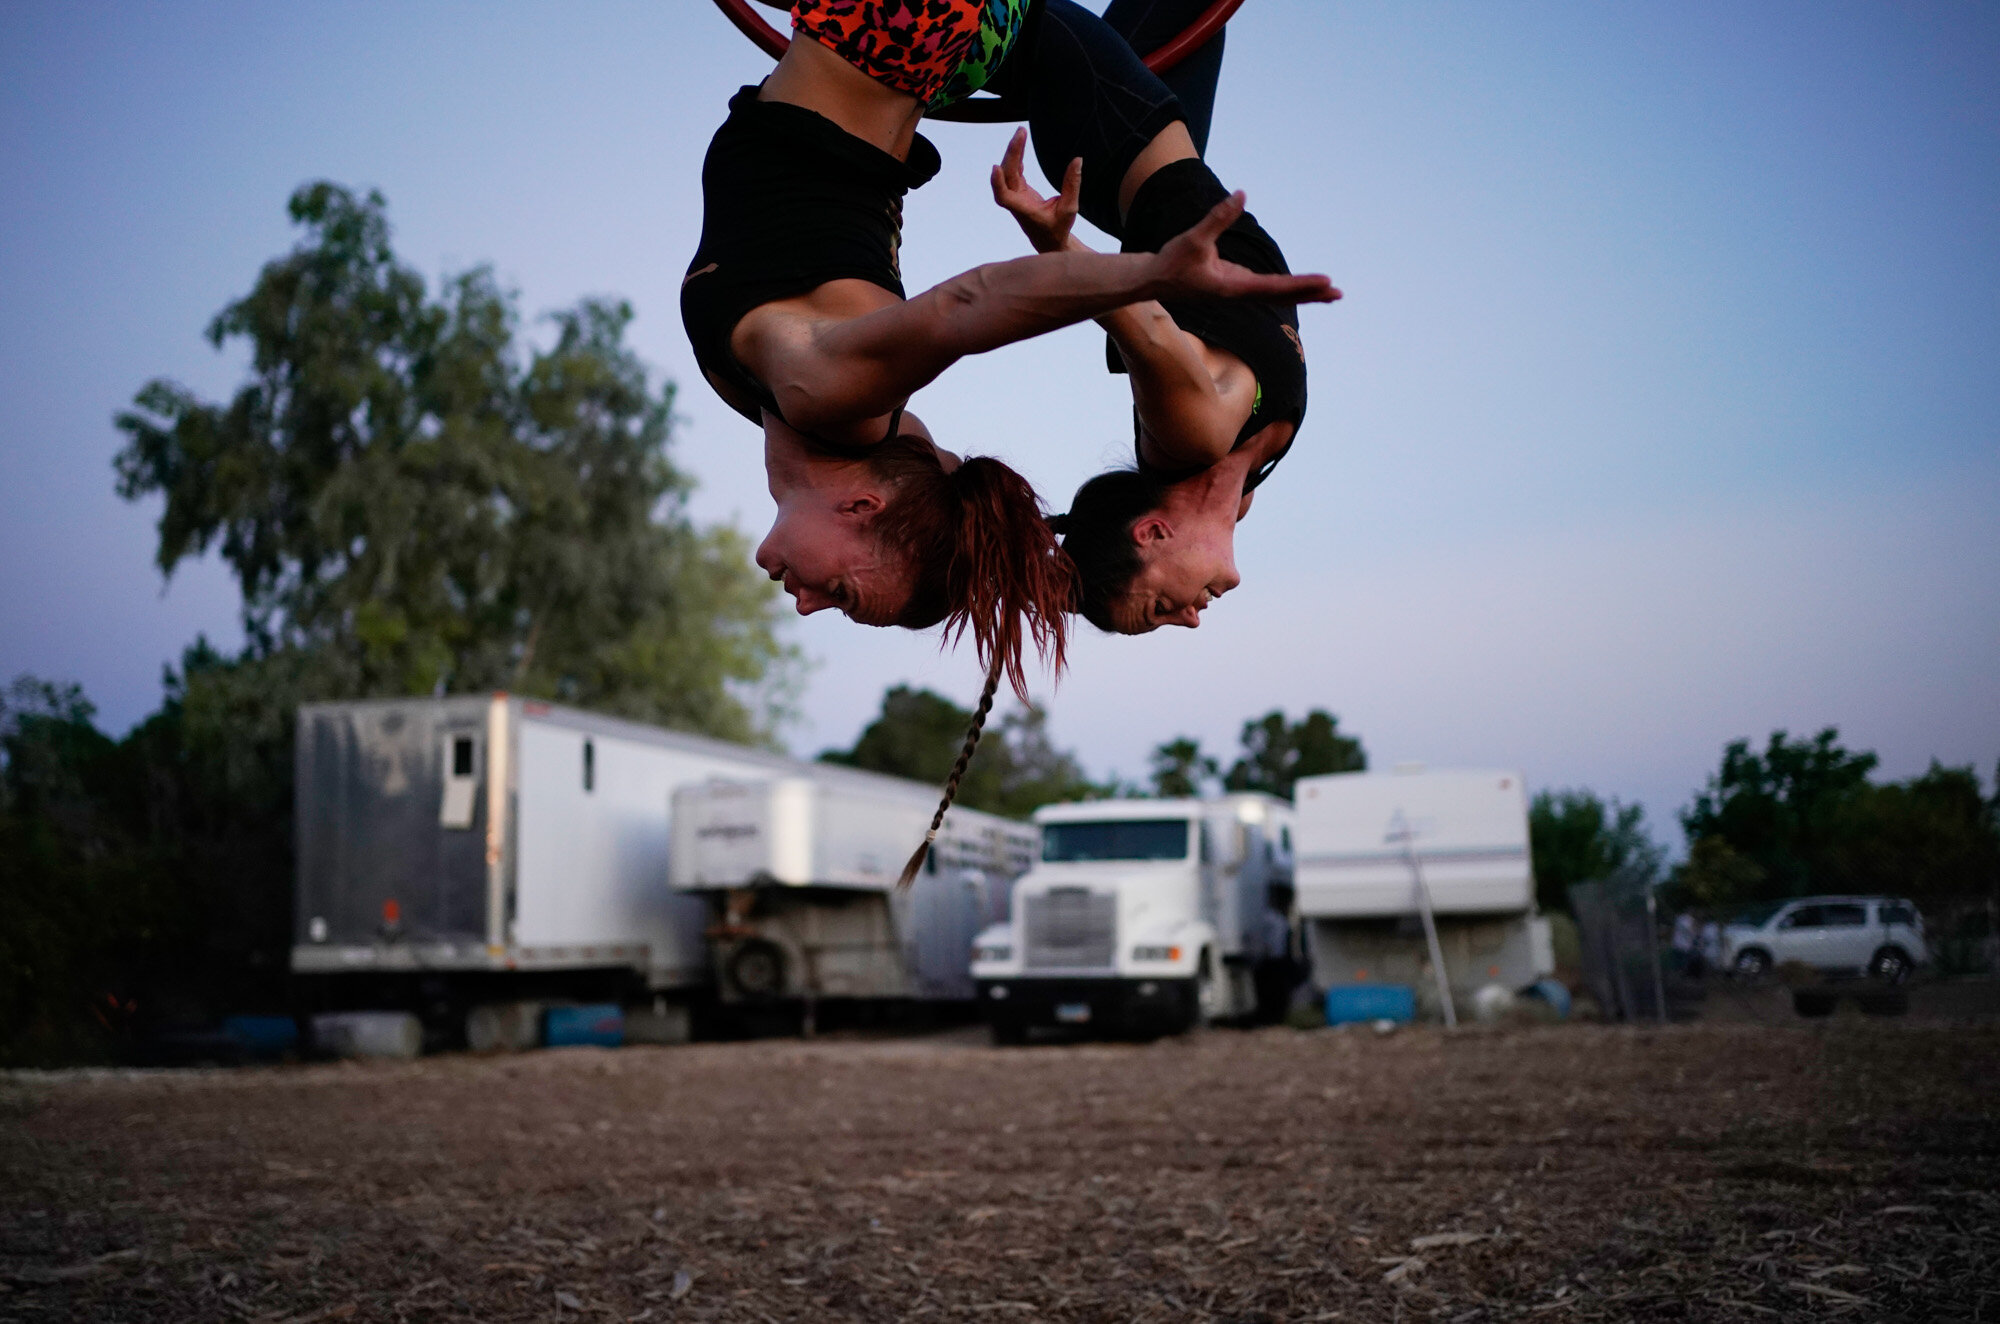  Lisa Varmbo Martonovich, left, and Nicole England-Czyzewski practice an aerial routine for "Gladius The Show," a touring equestrian and acrobatic show, on May 28, 2020, in Las Vegas. The coronavirus forced the producers to cancel all of their perfor